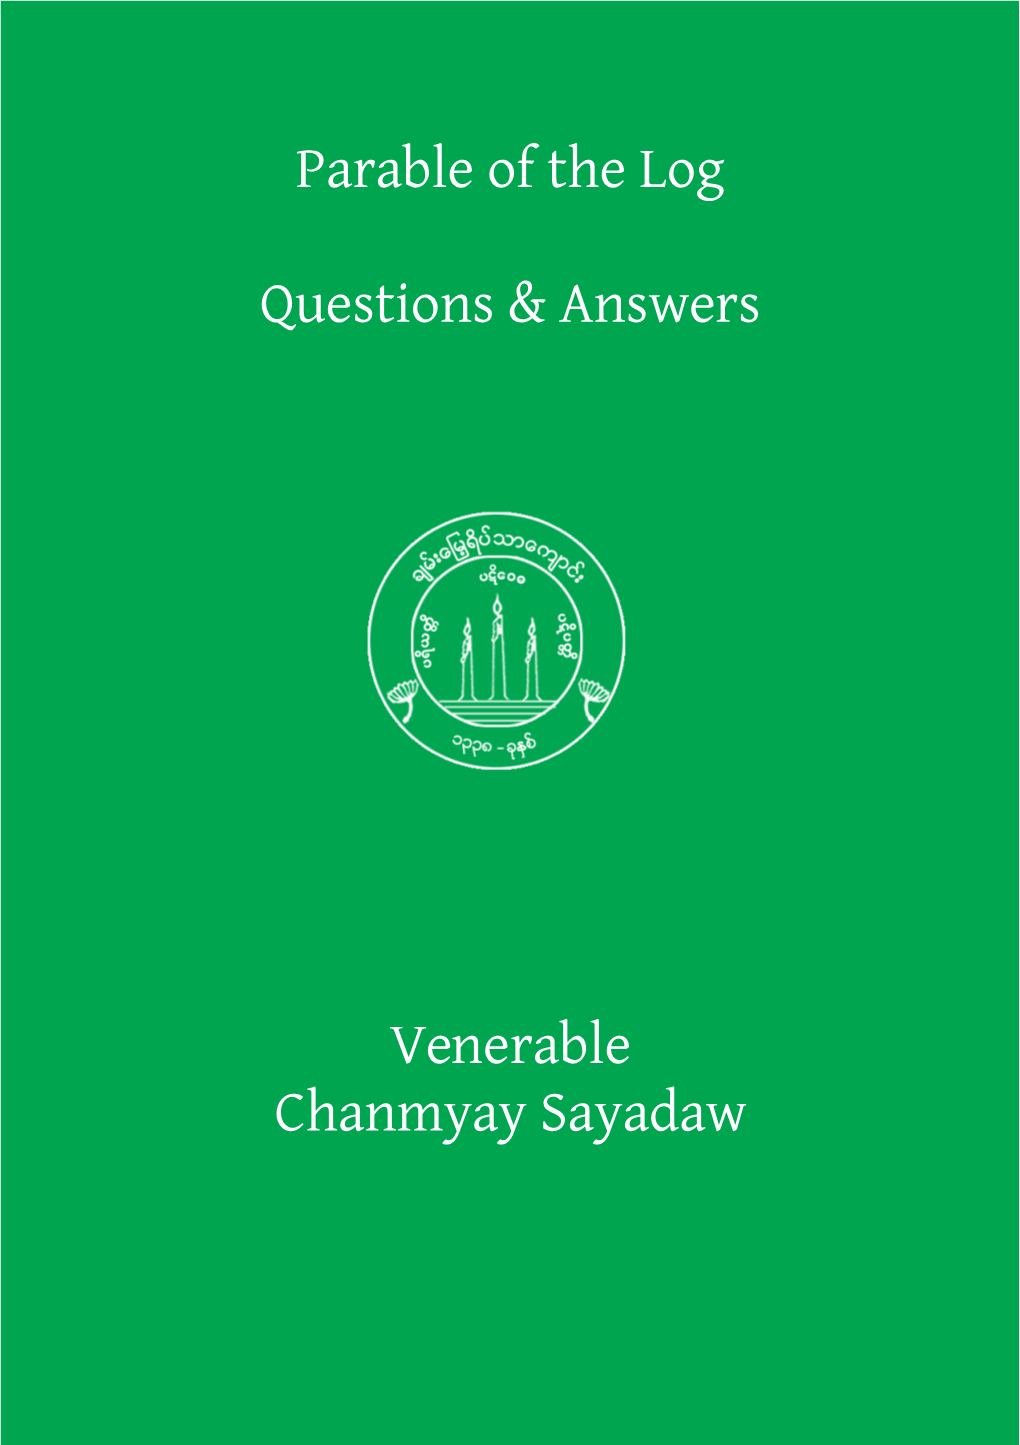 Parable of the Log Questions & Answers Venerable Chanmyay